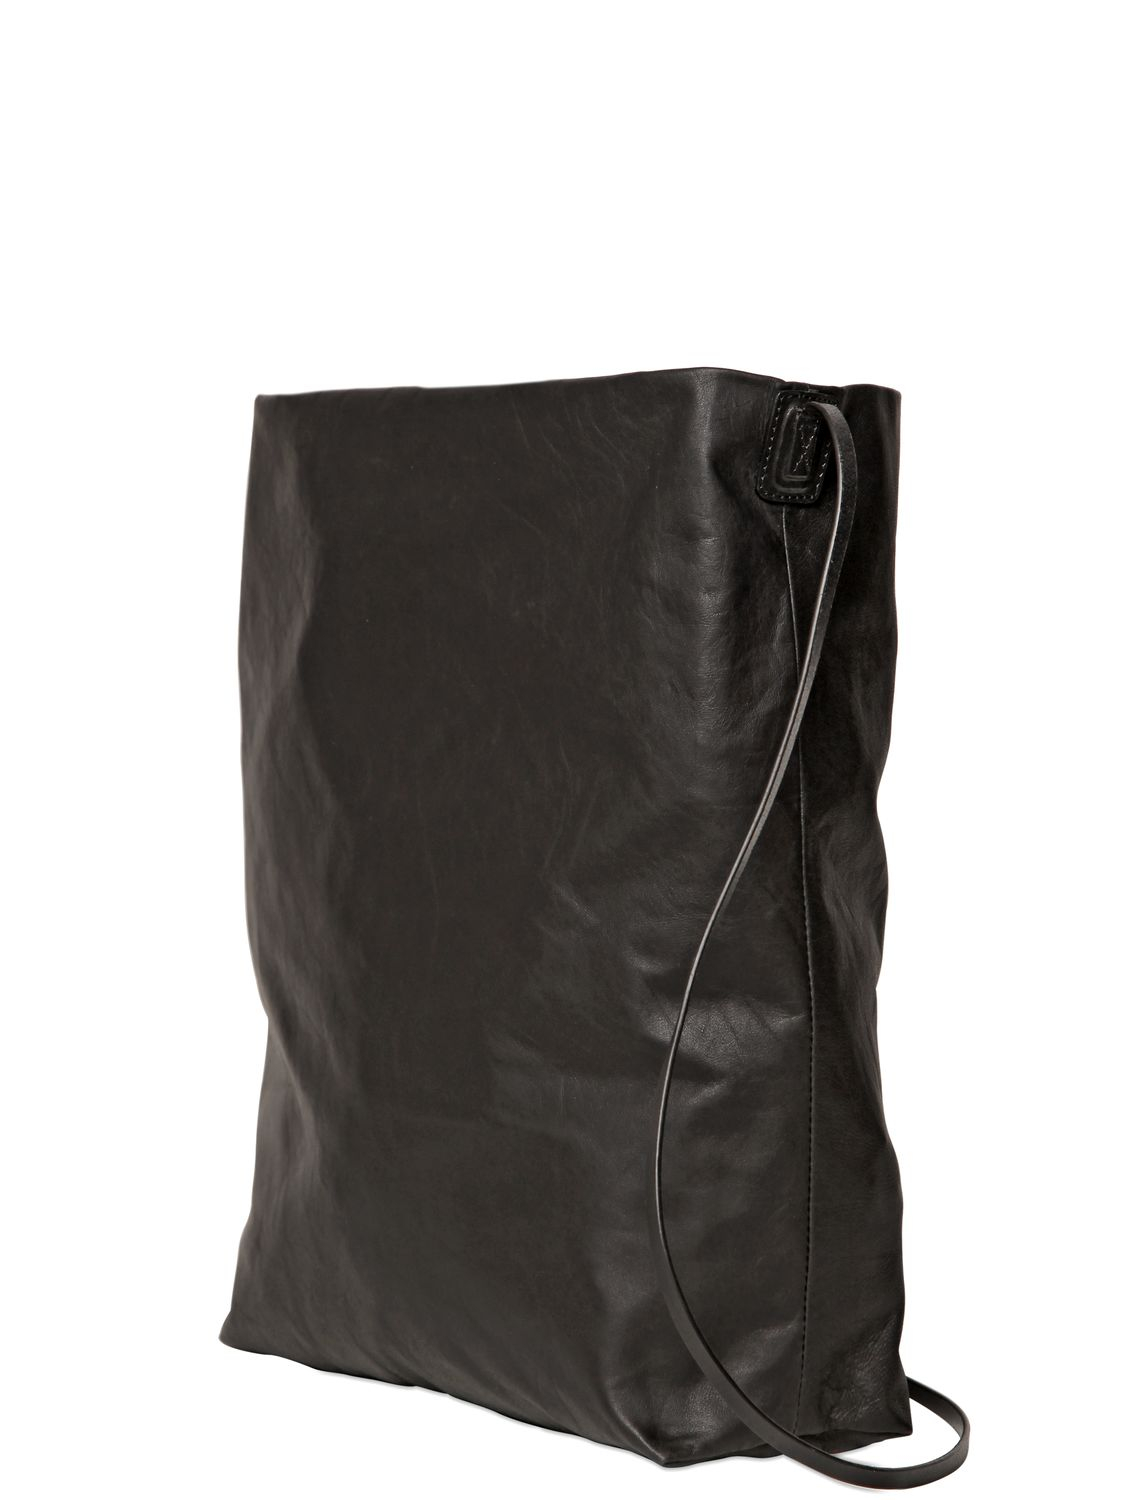 Rick Owens Nappa Leather Large Cross Body Bag in Black - Lyst